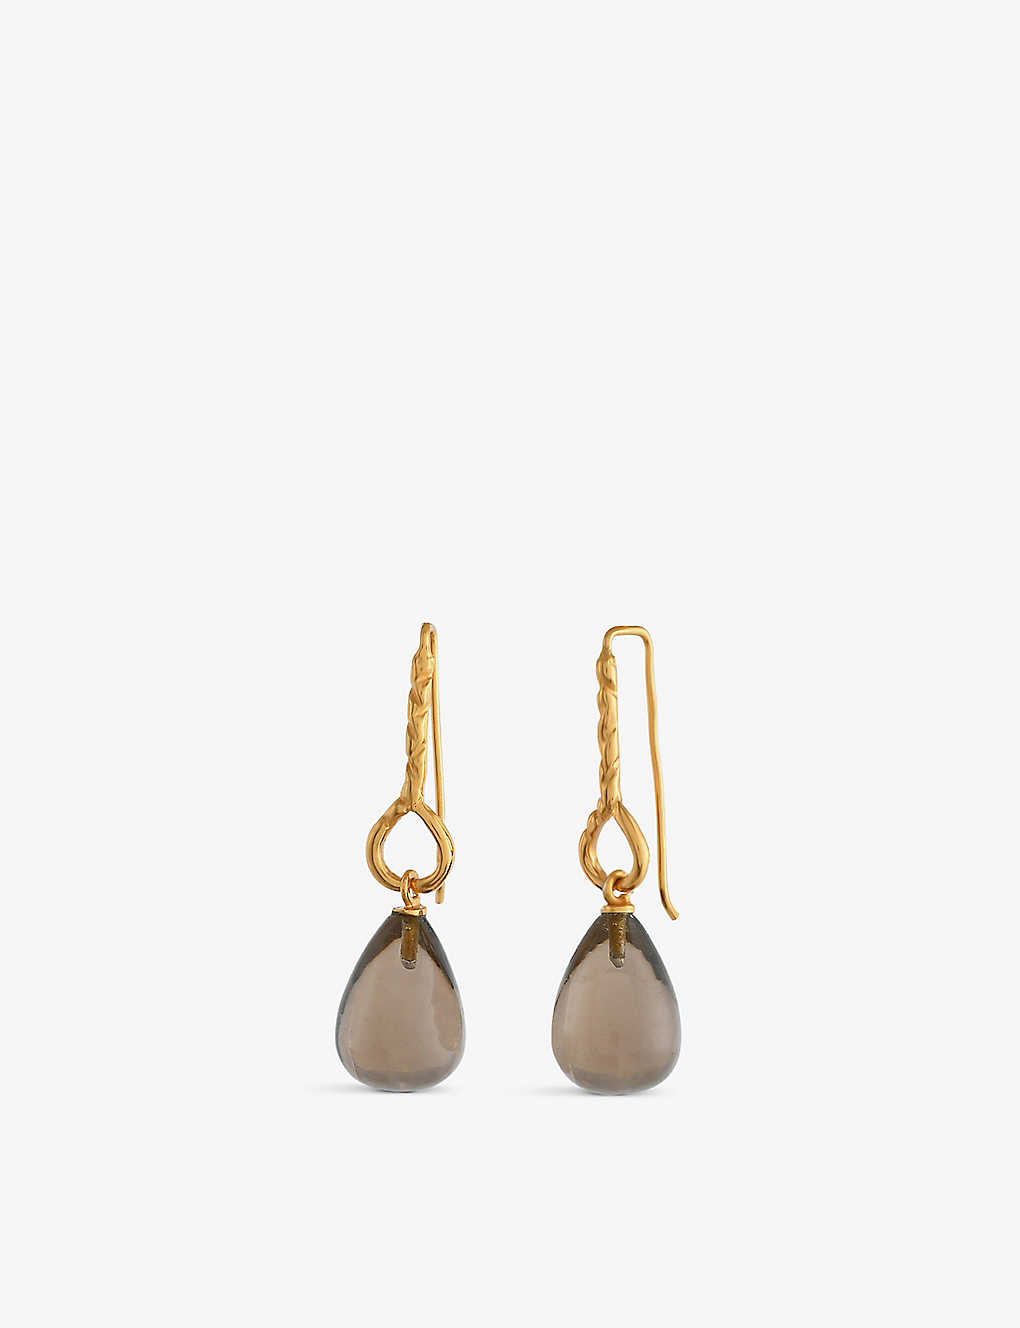 Shyla Helena 22ct Yellow Gold-plated Sterling-silver And Glass Drop Earrings In Brown